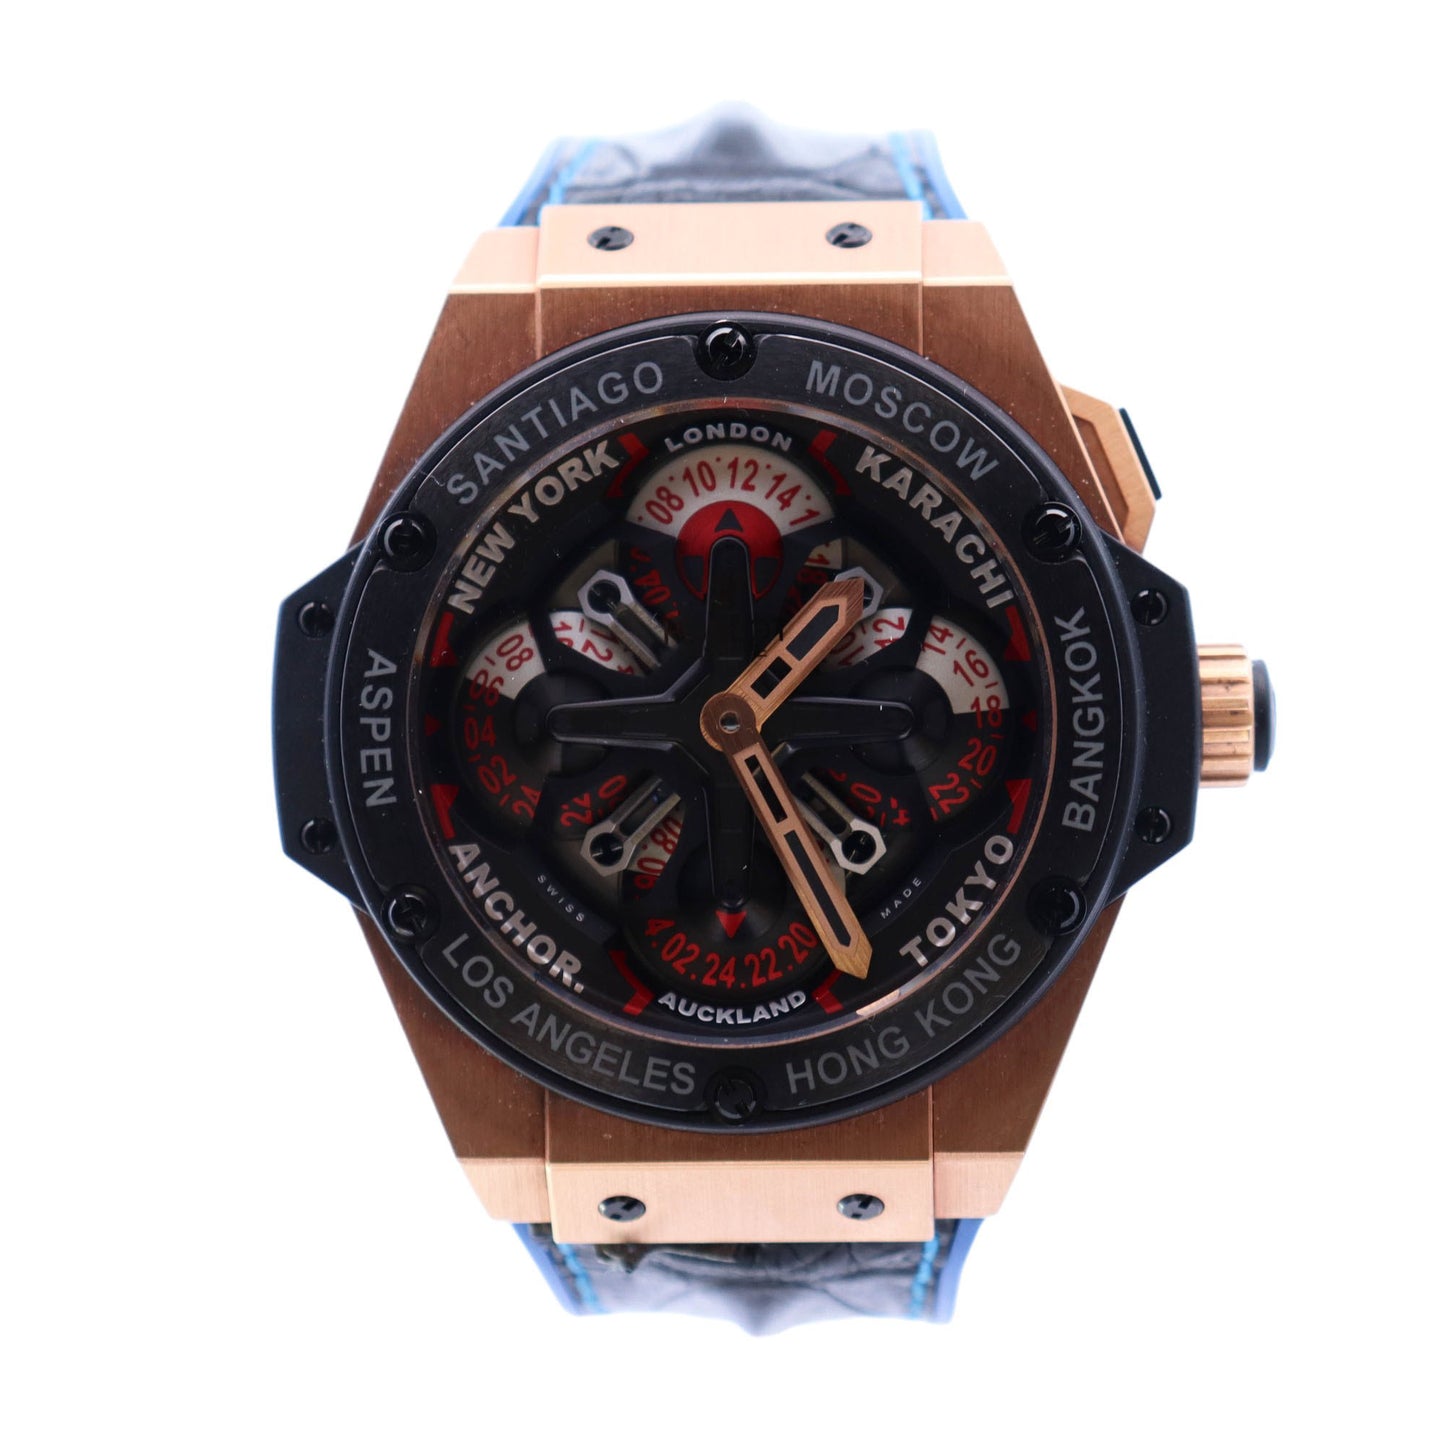 Hublot Big Bang King Power Unico GMT Rose Gold 48mm Black World Time Dial Watch Reference# 771.OM.1170.RX - Happy Jewelers Fine Jewelry Lifetime Warranty